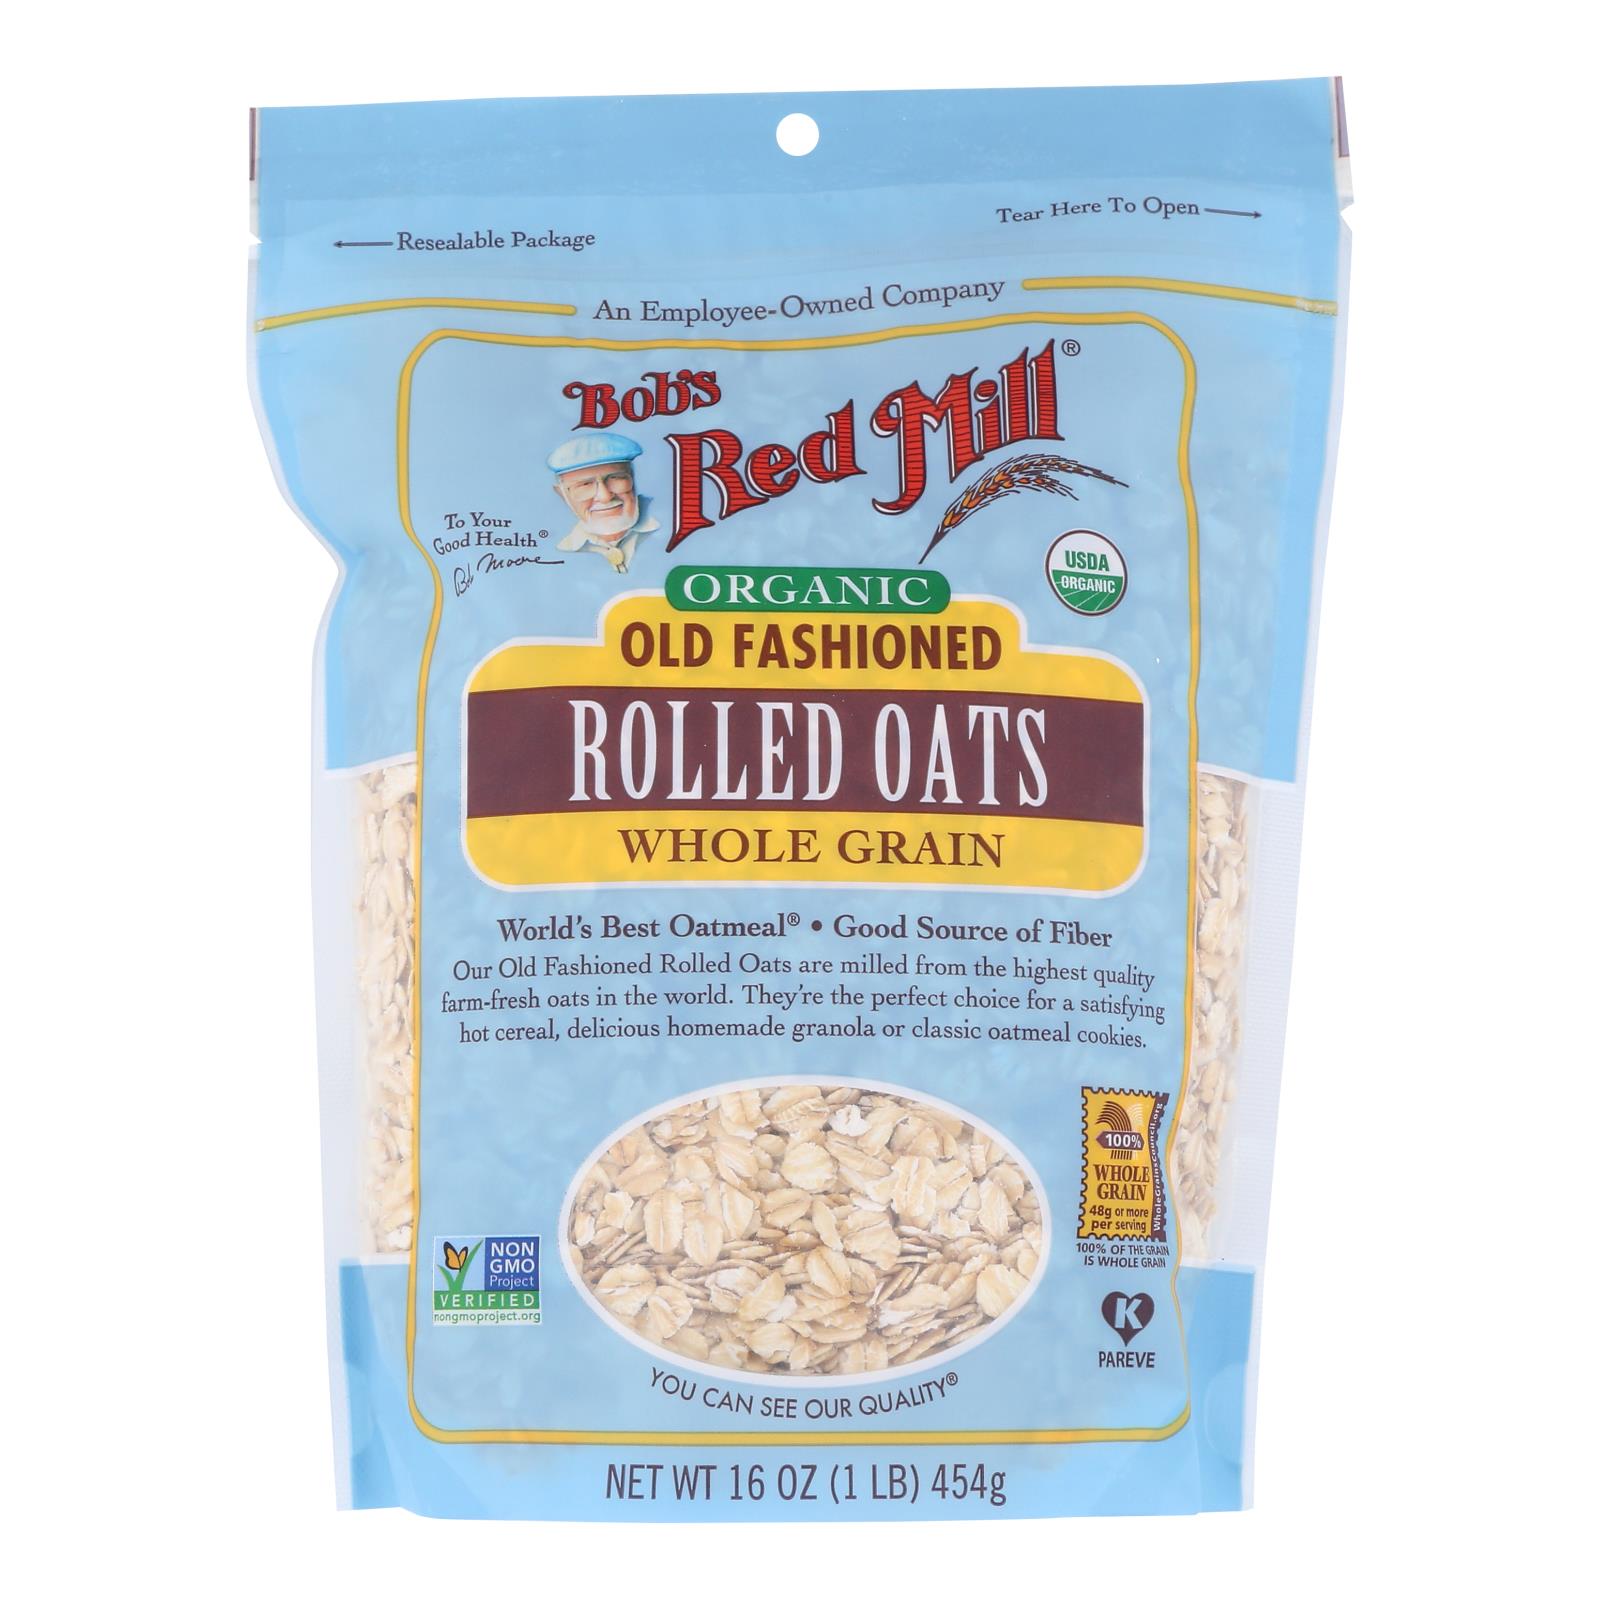 Bob's Red Mill - Organic Old Fashioned Rolled Oats - 4개 묶음상품-16 OZ